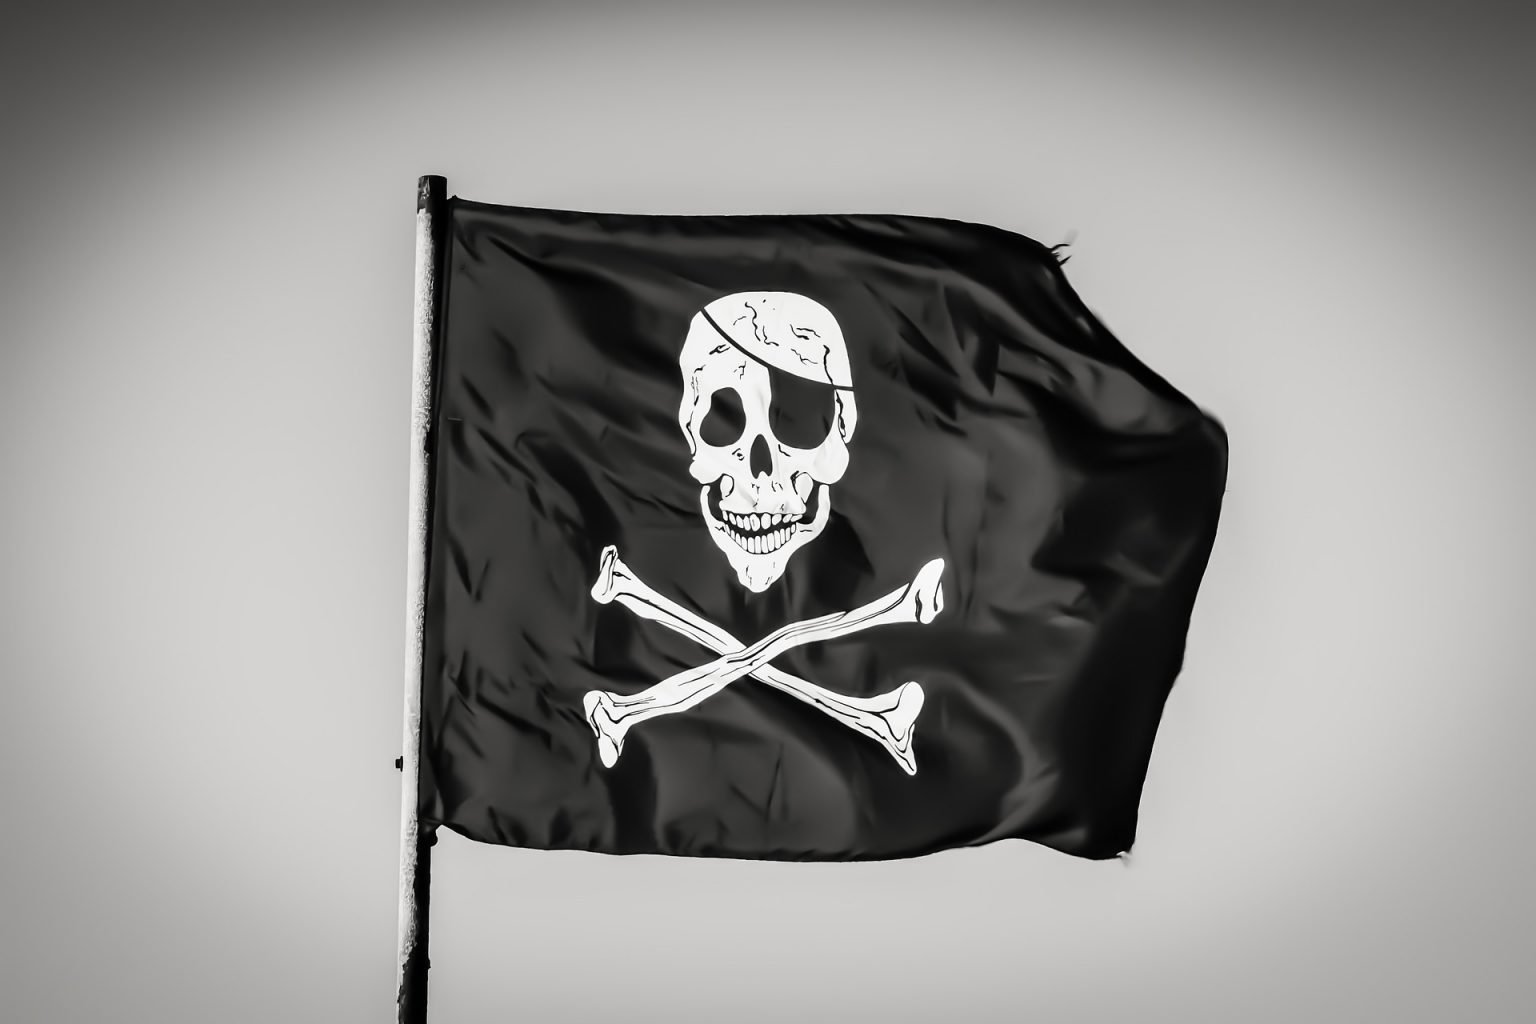 2017 Piracy Assessment and Avoidance Methods from Piracy Attacks